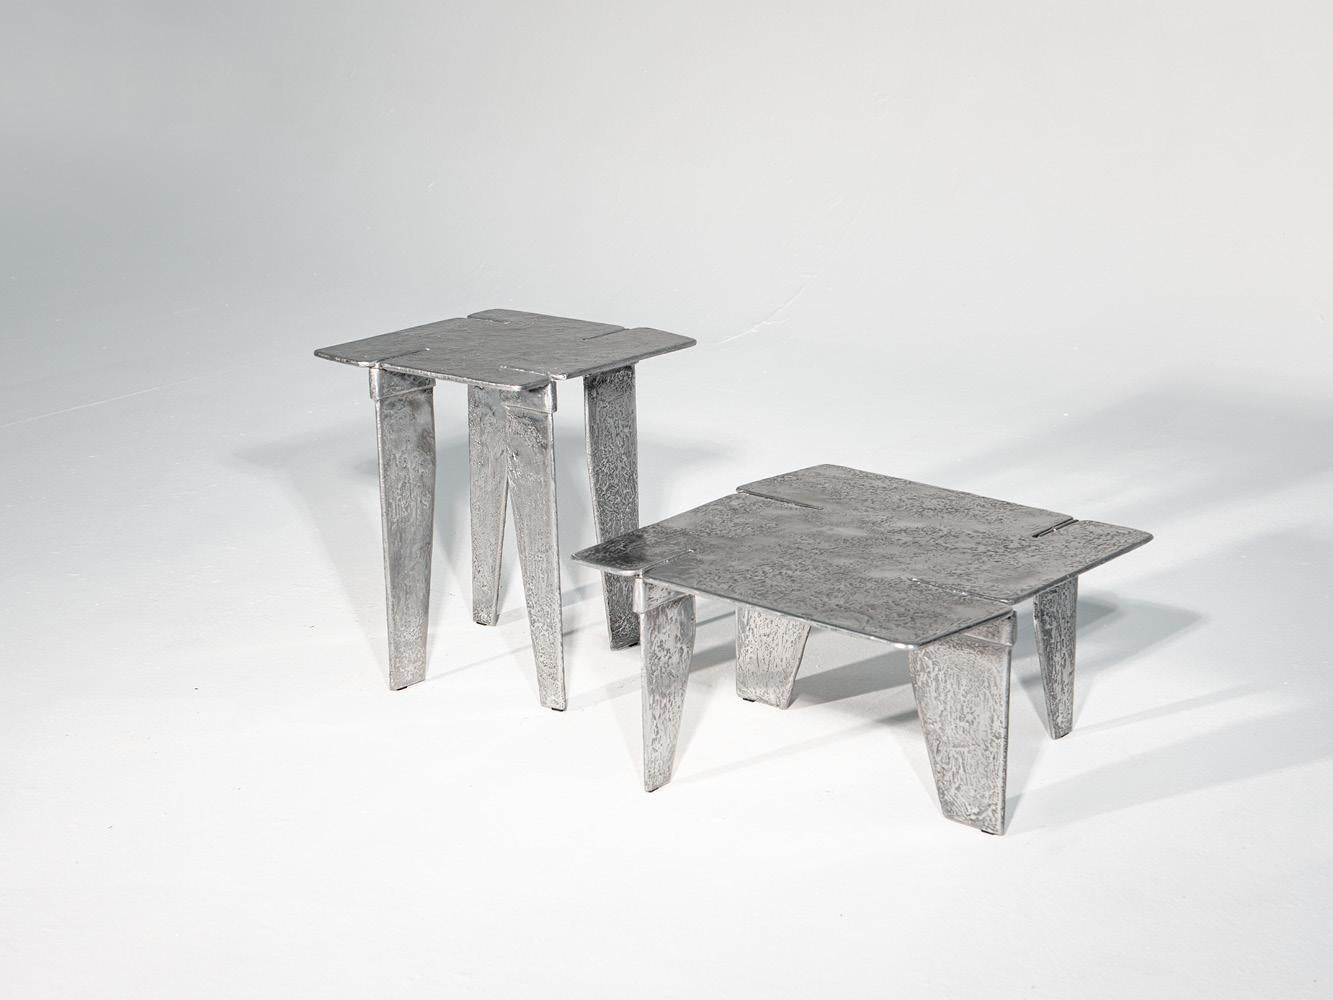 Made in Italy

Overlap coffee table is obtained through metal casting into sand molds. Four cavities on the top, one for each side, envelope the legs that support the rectangular top with rounded corners. The sculptural look of its surface makes